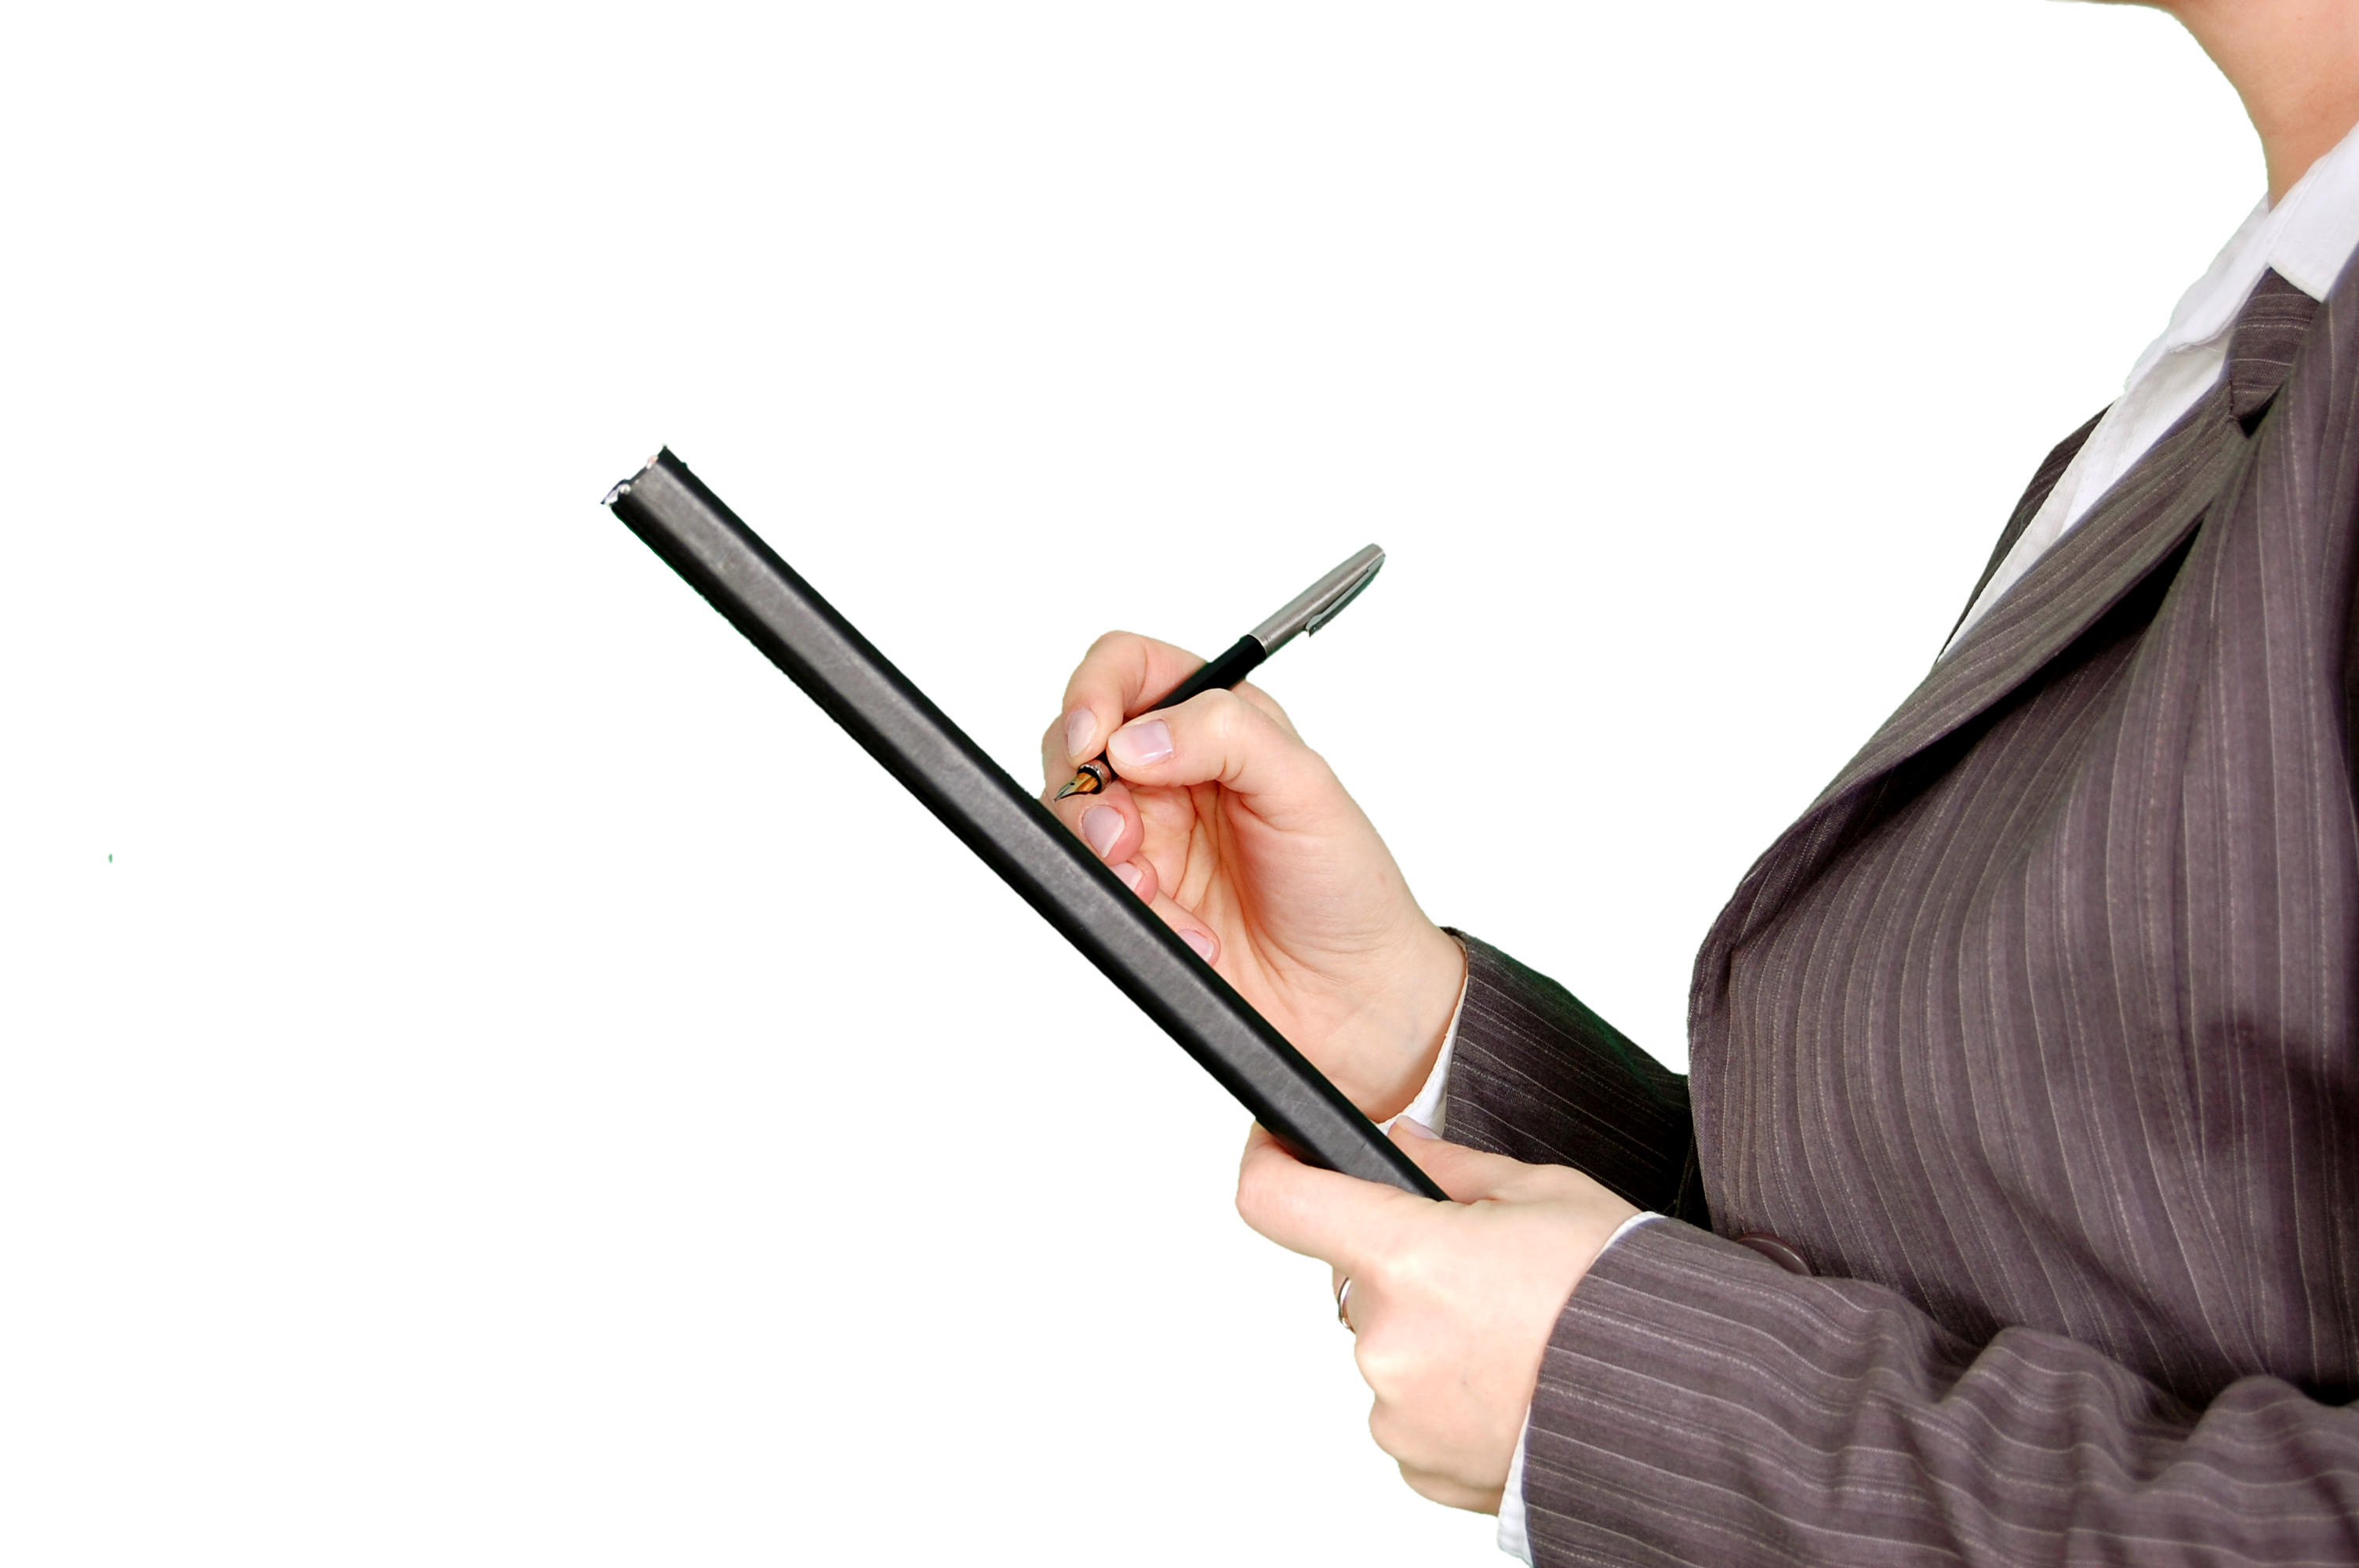 Woman in Gray Pinstripe Blazer Holding Black and Gray Stylus Pen and Black Pad, Business, Businesswoman, Corporate, Hands, HQ Photo